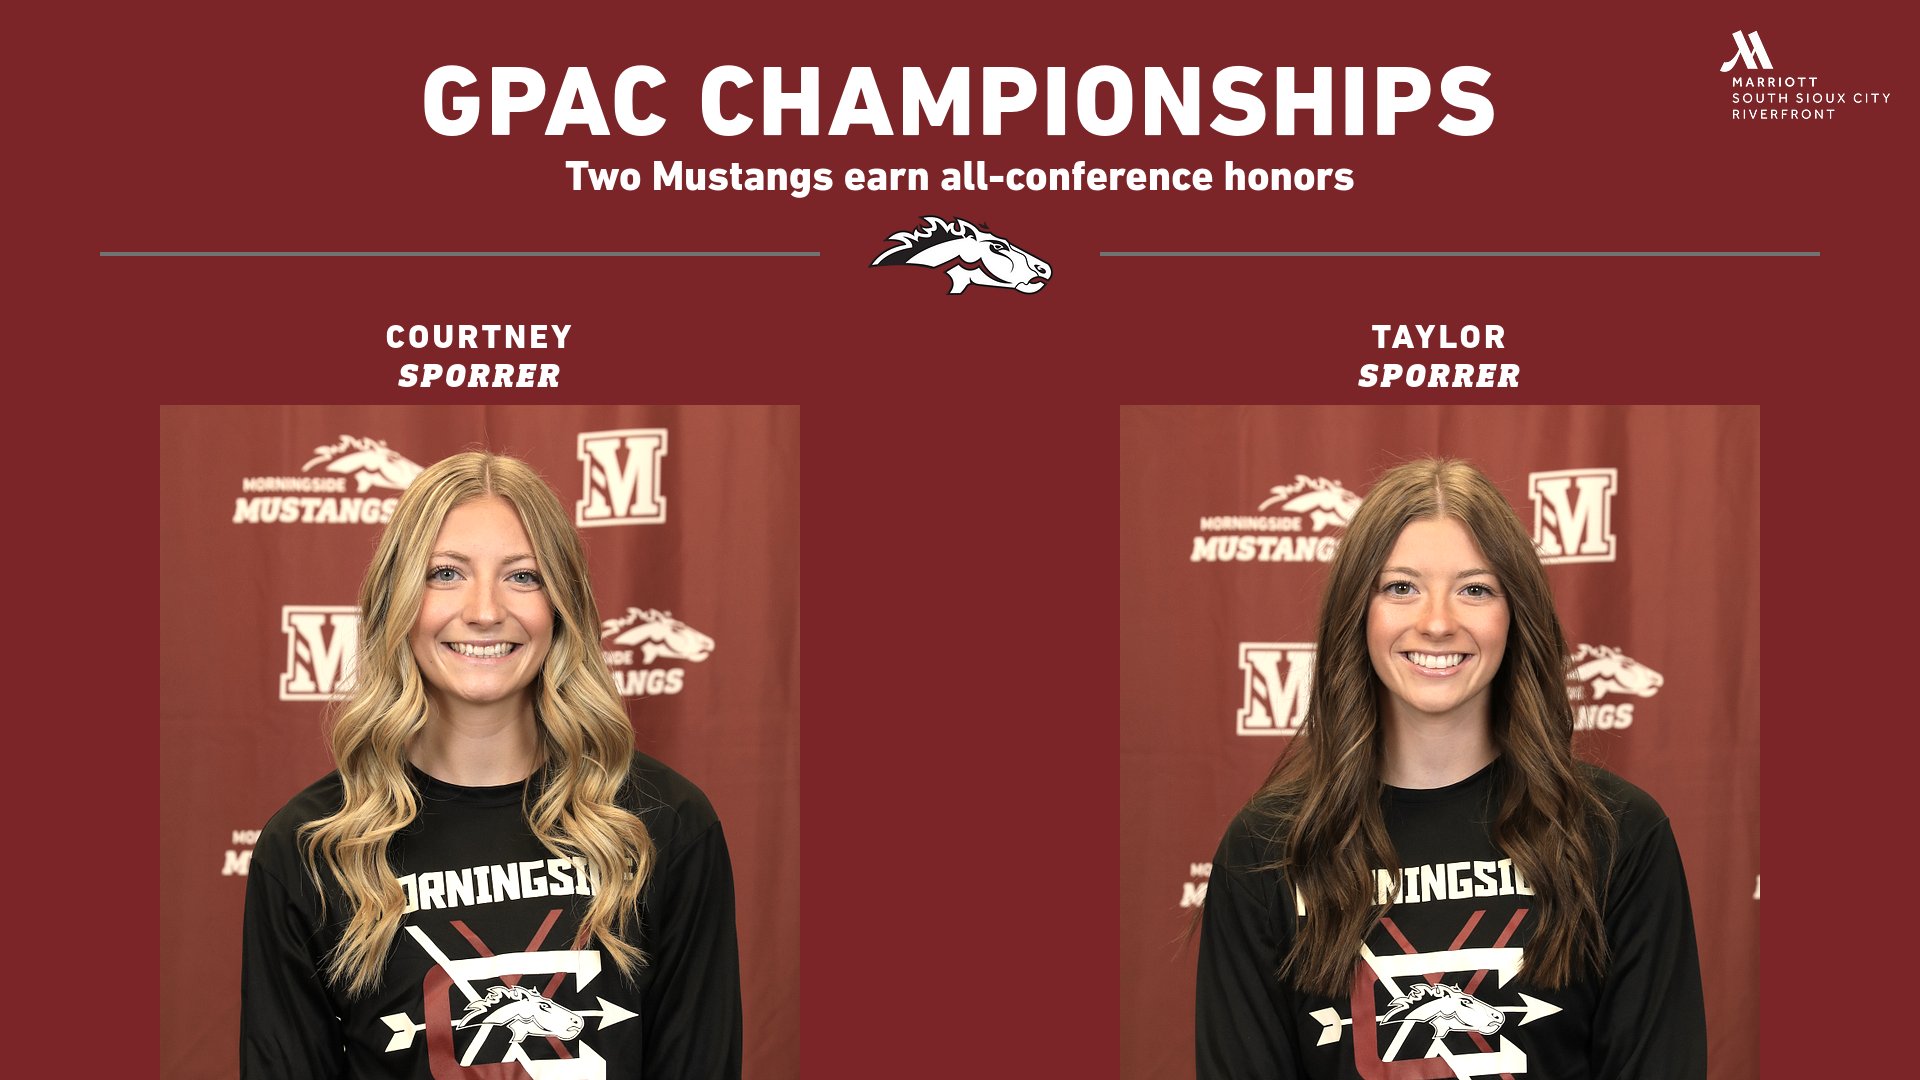 Two Mustangs earn all-conference honors at GPAC Championship